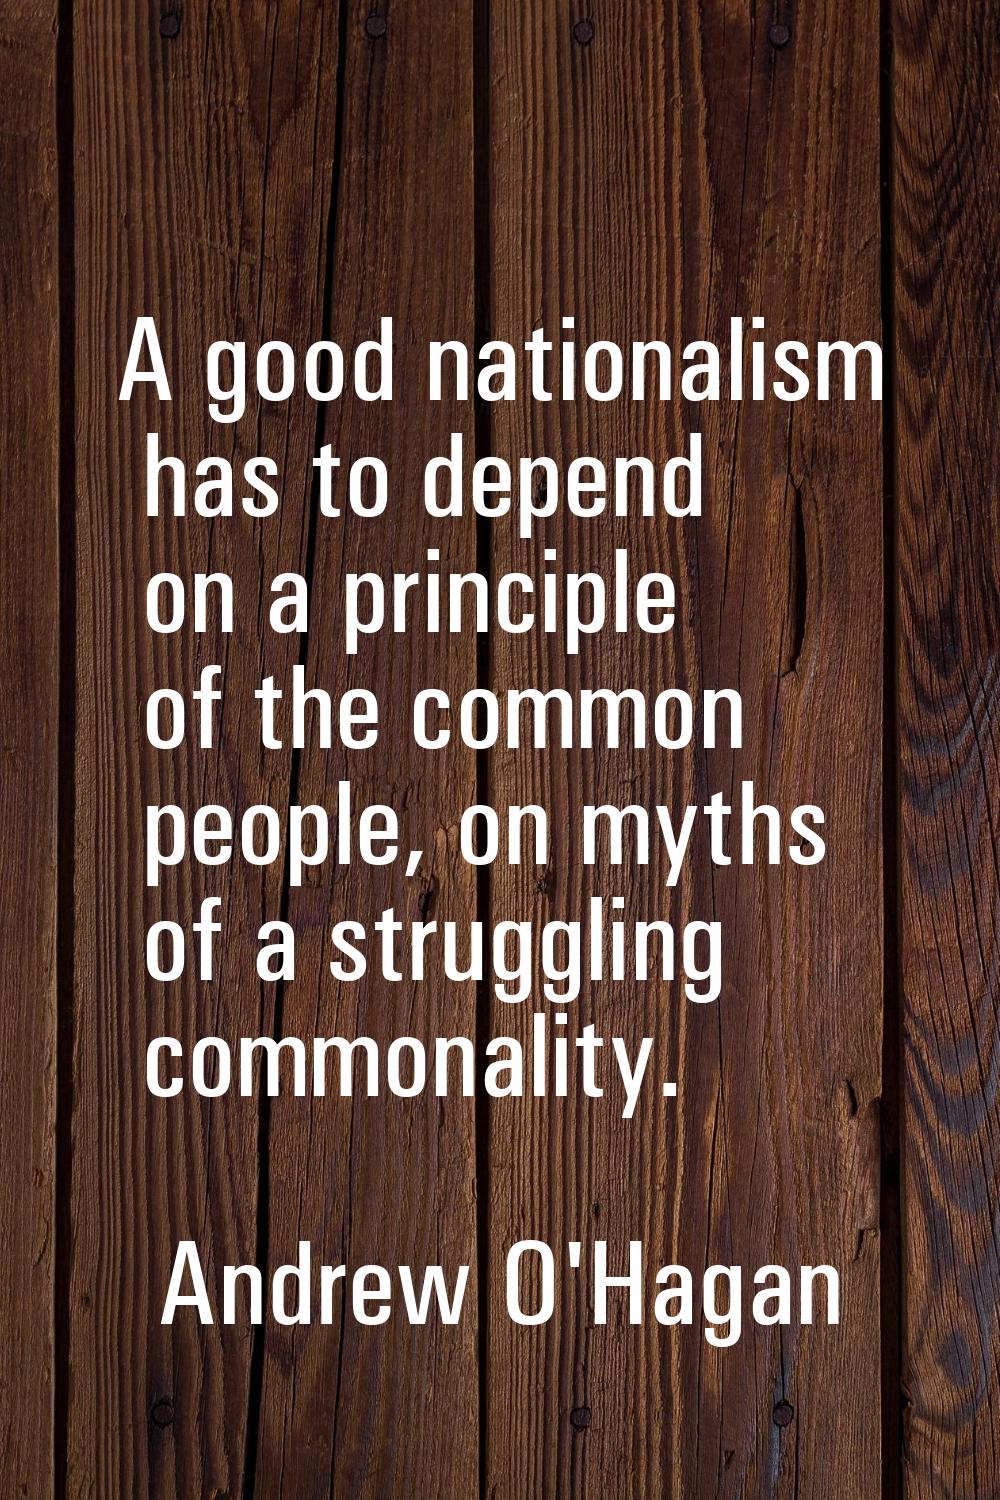 A good nationalism has to depend on a principle of the common people, on myths of a struggling comm